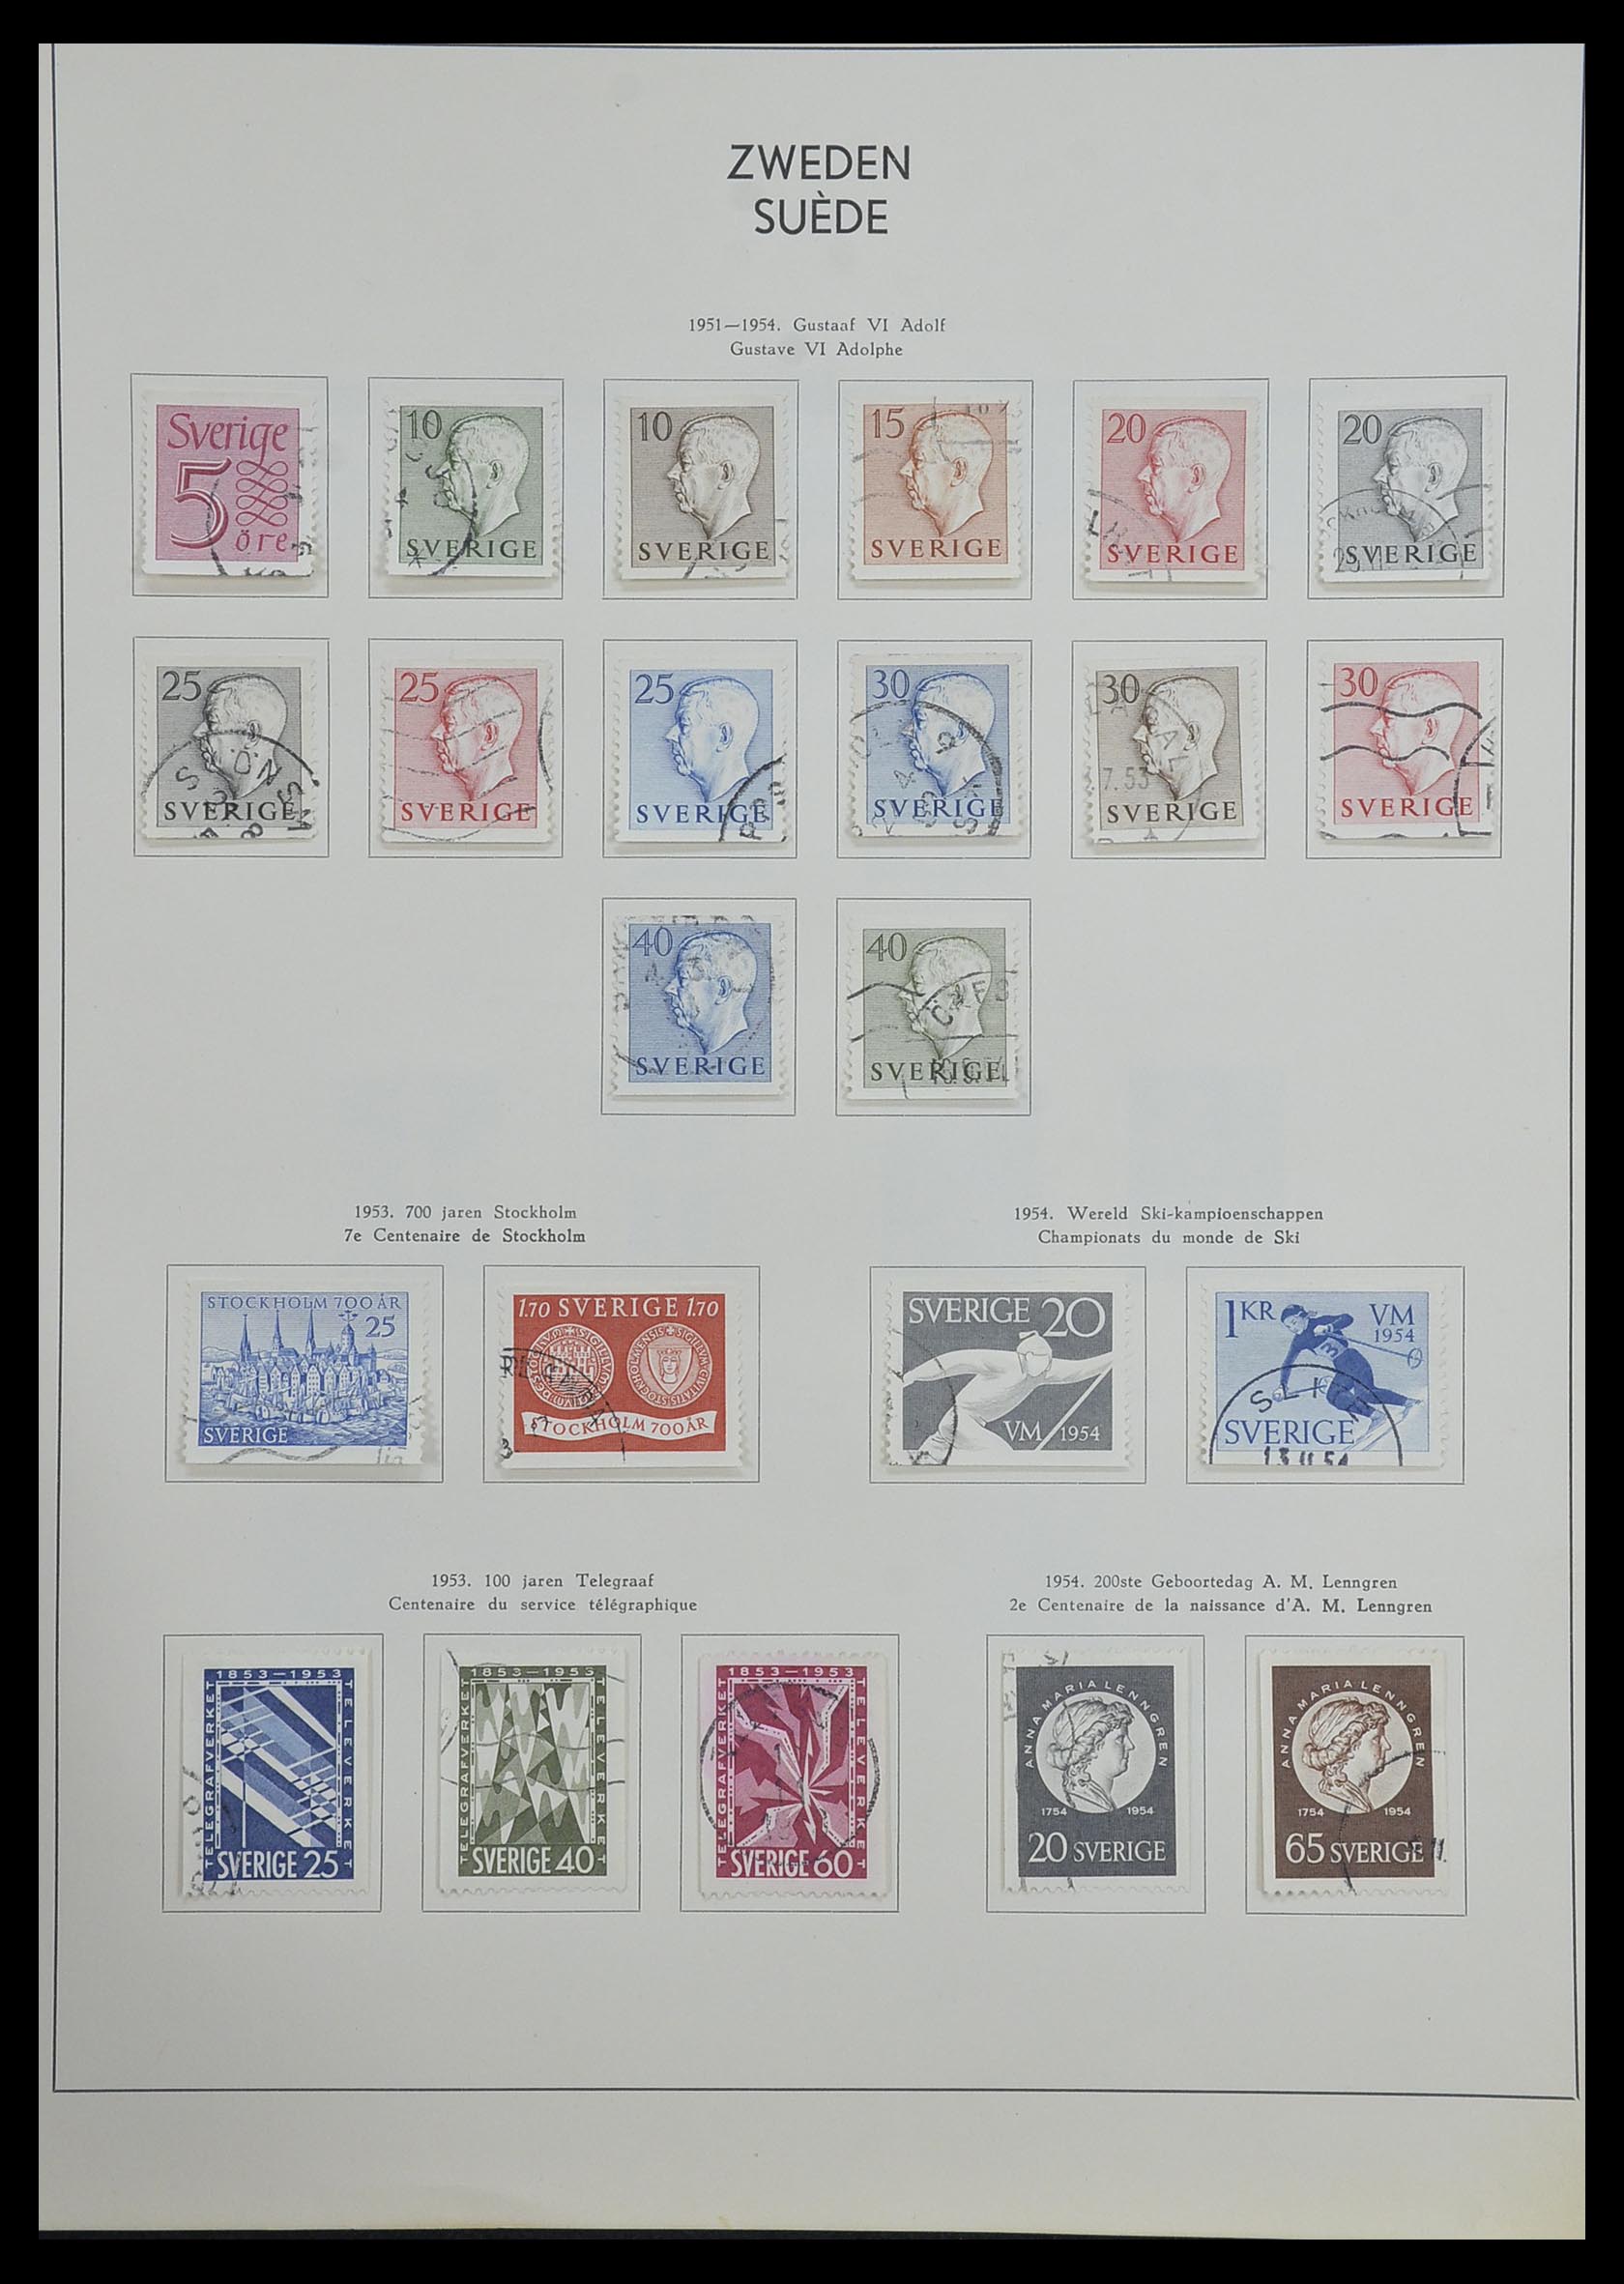 33629 032 - Stamp collection 33629 Sweden 1858-1957.